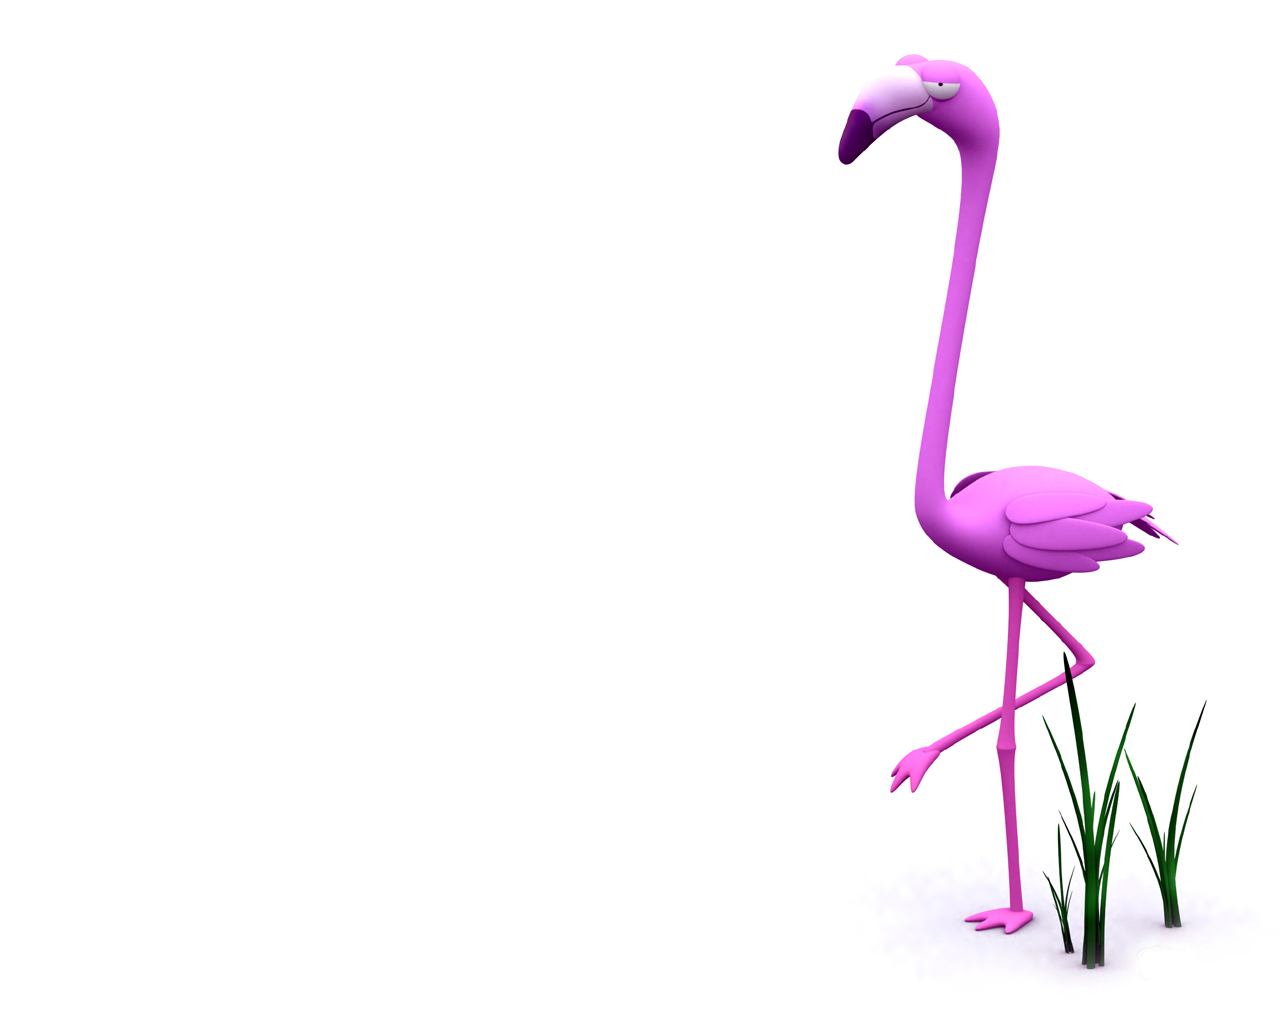  Flamingo 3d pictures on the desktop and wallpapers wallpapers